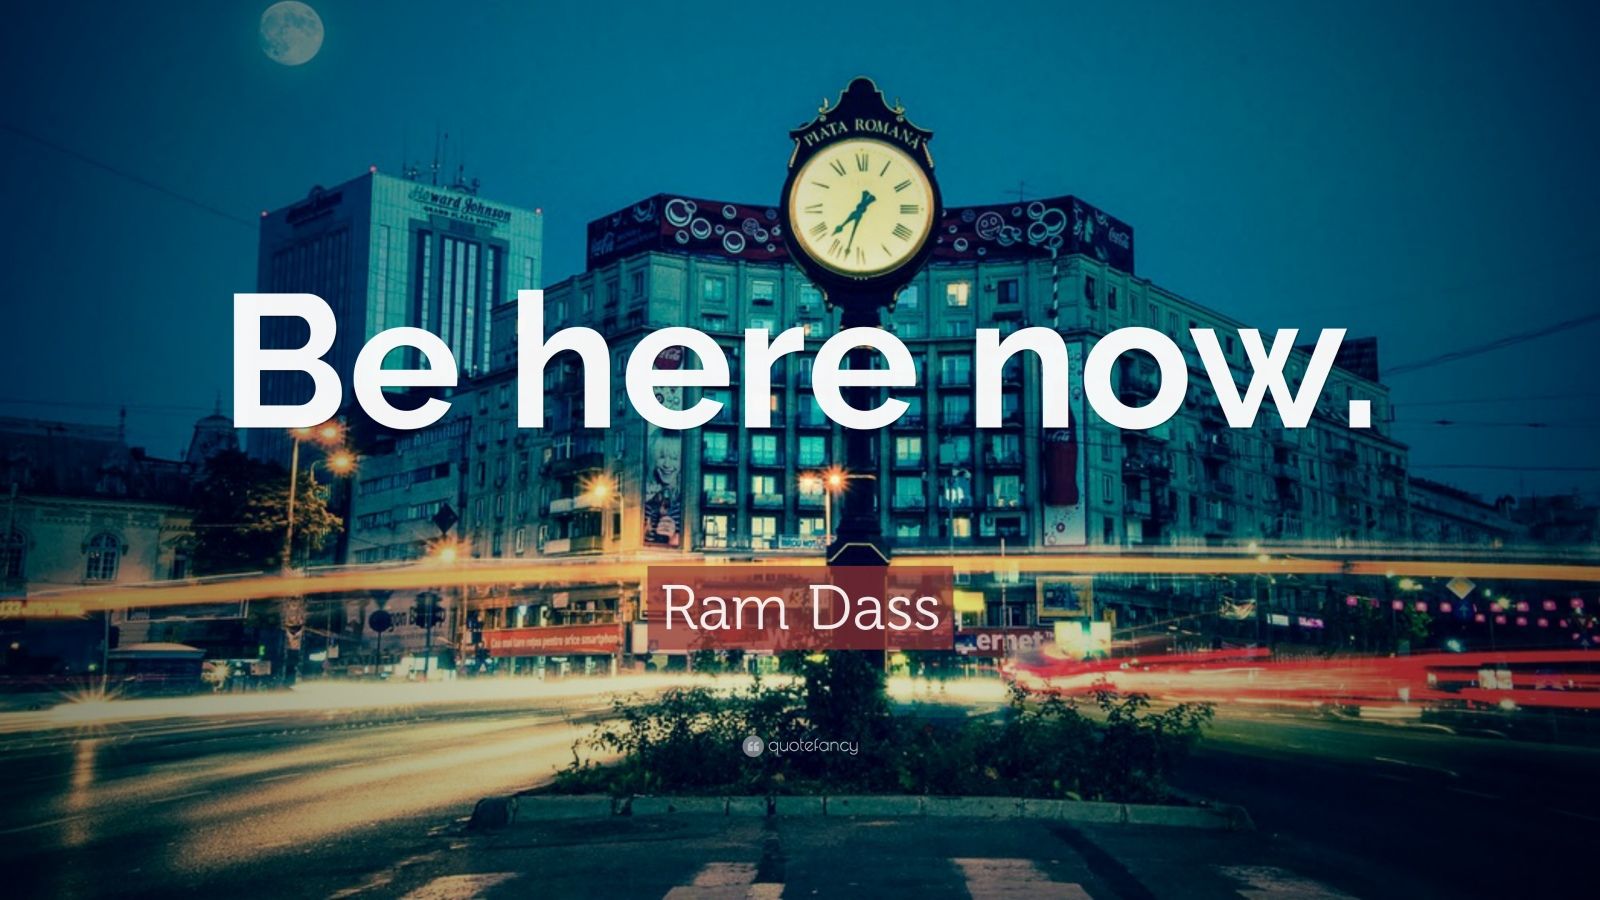 ram dass just be here now